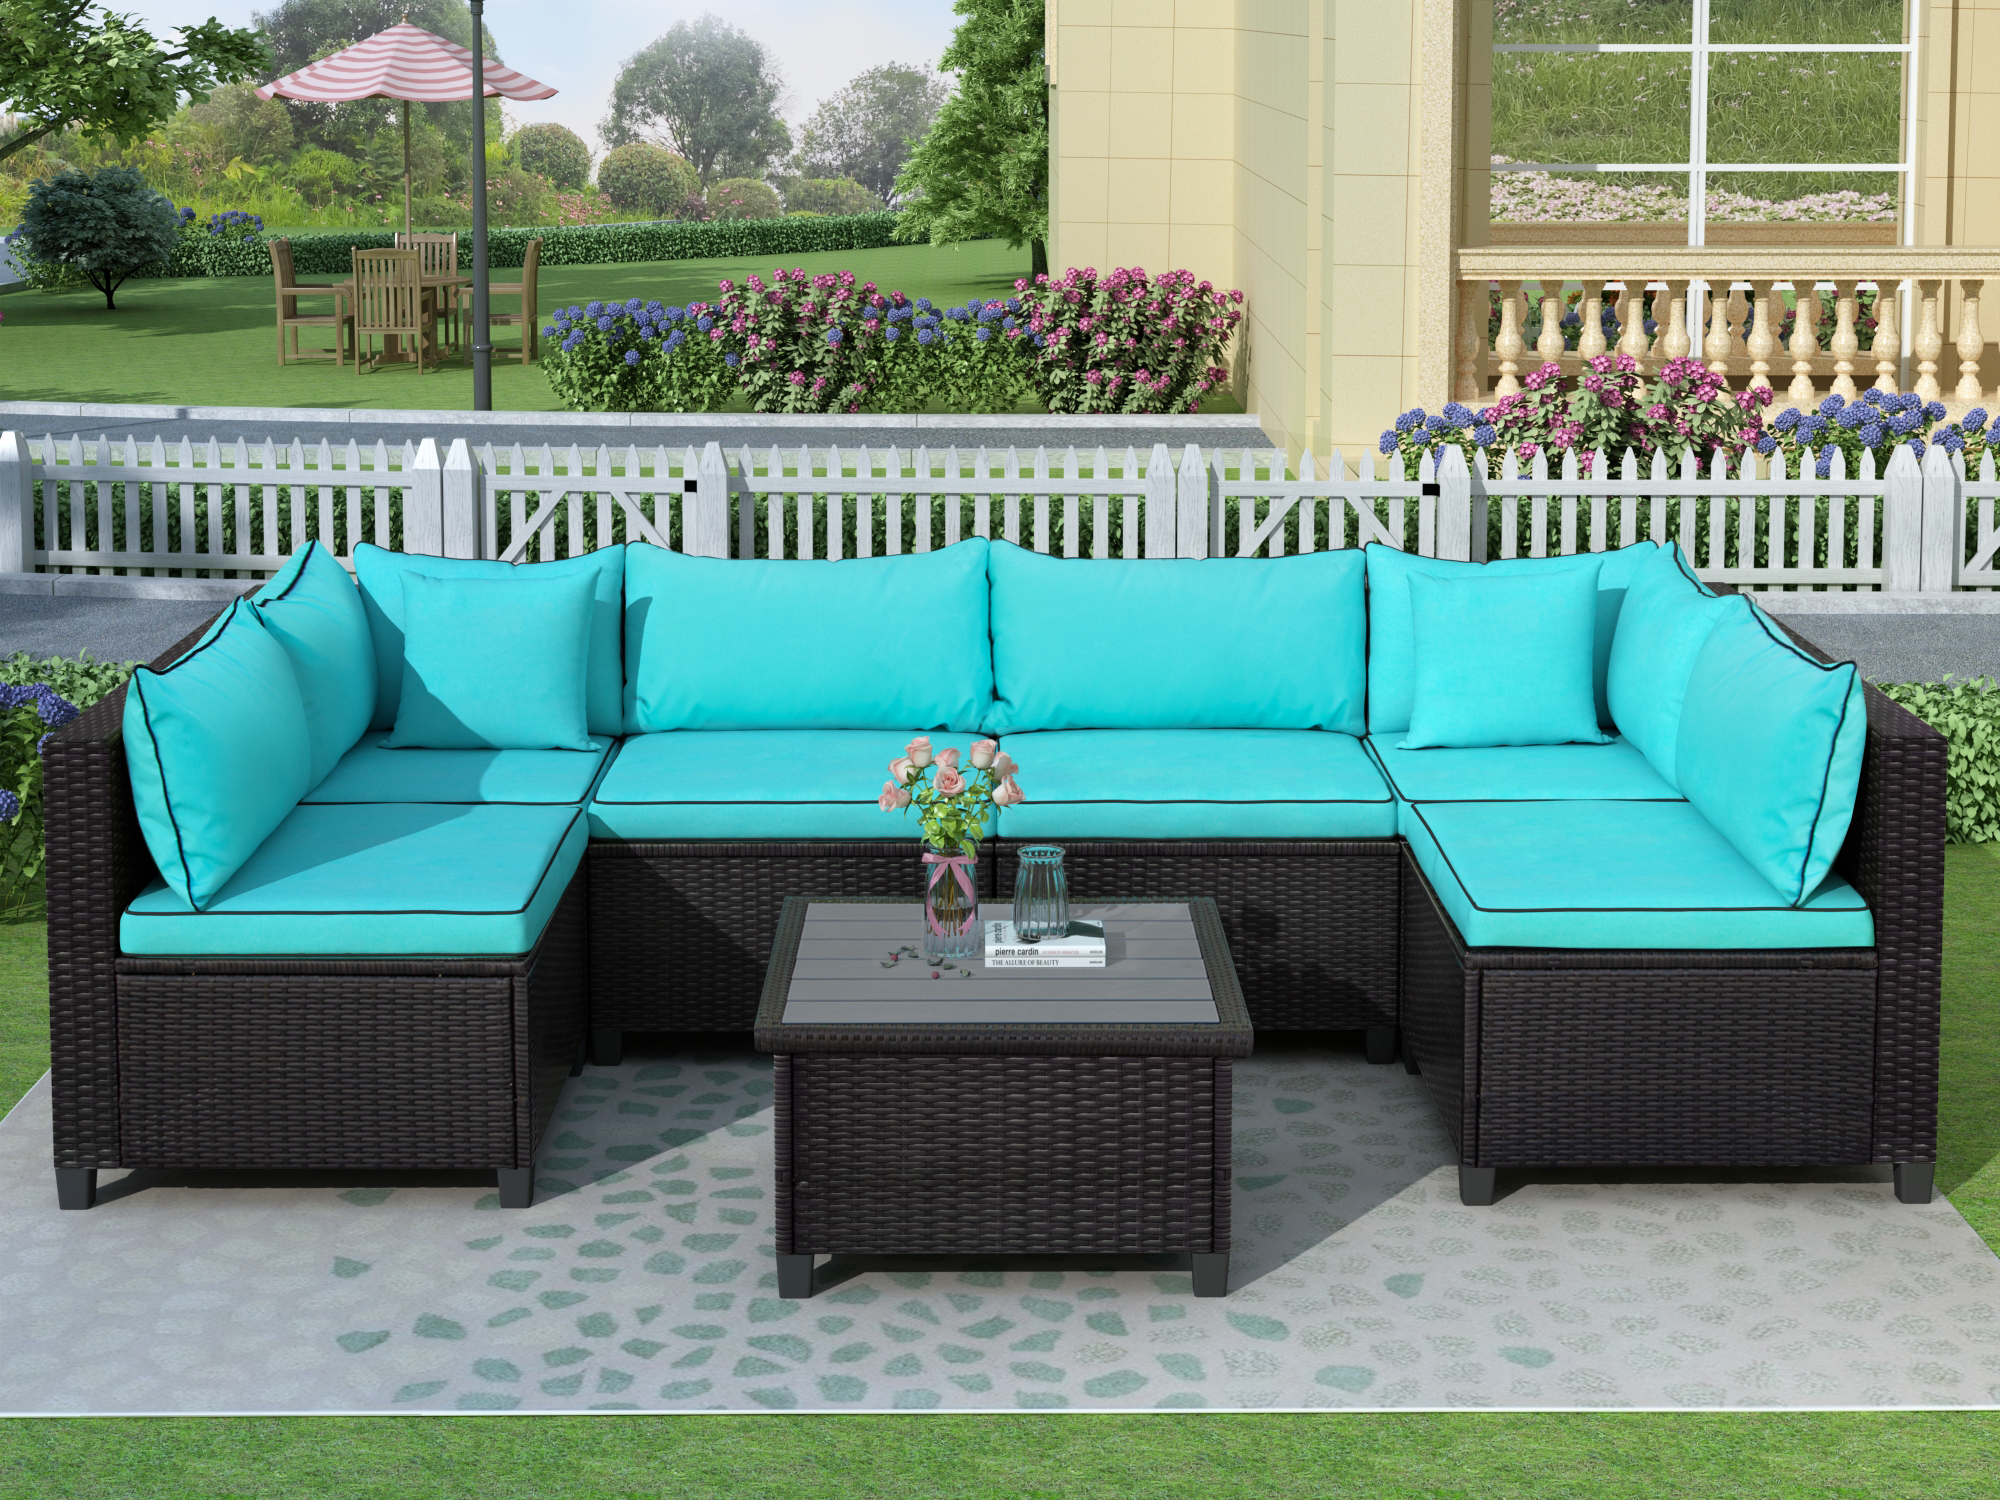 U-Shape Sectional Rattan Wicker Patio Set With Cushions And Accent Pillows - WY000111CAA